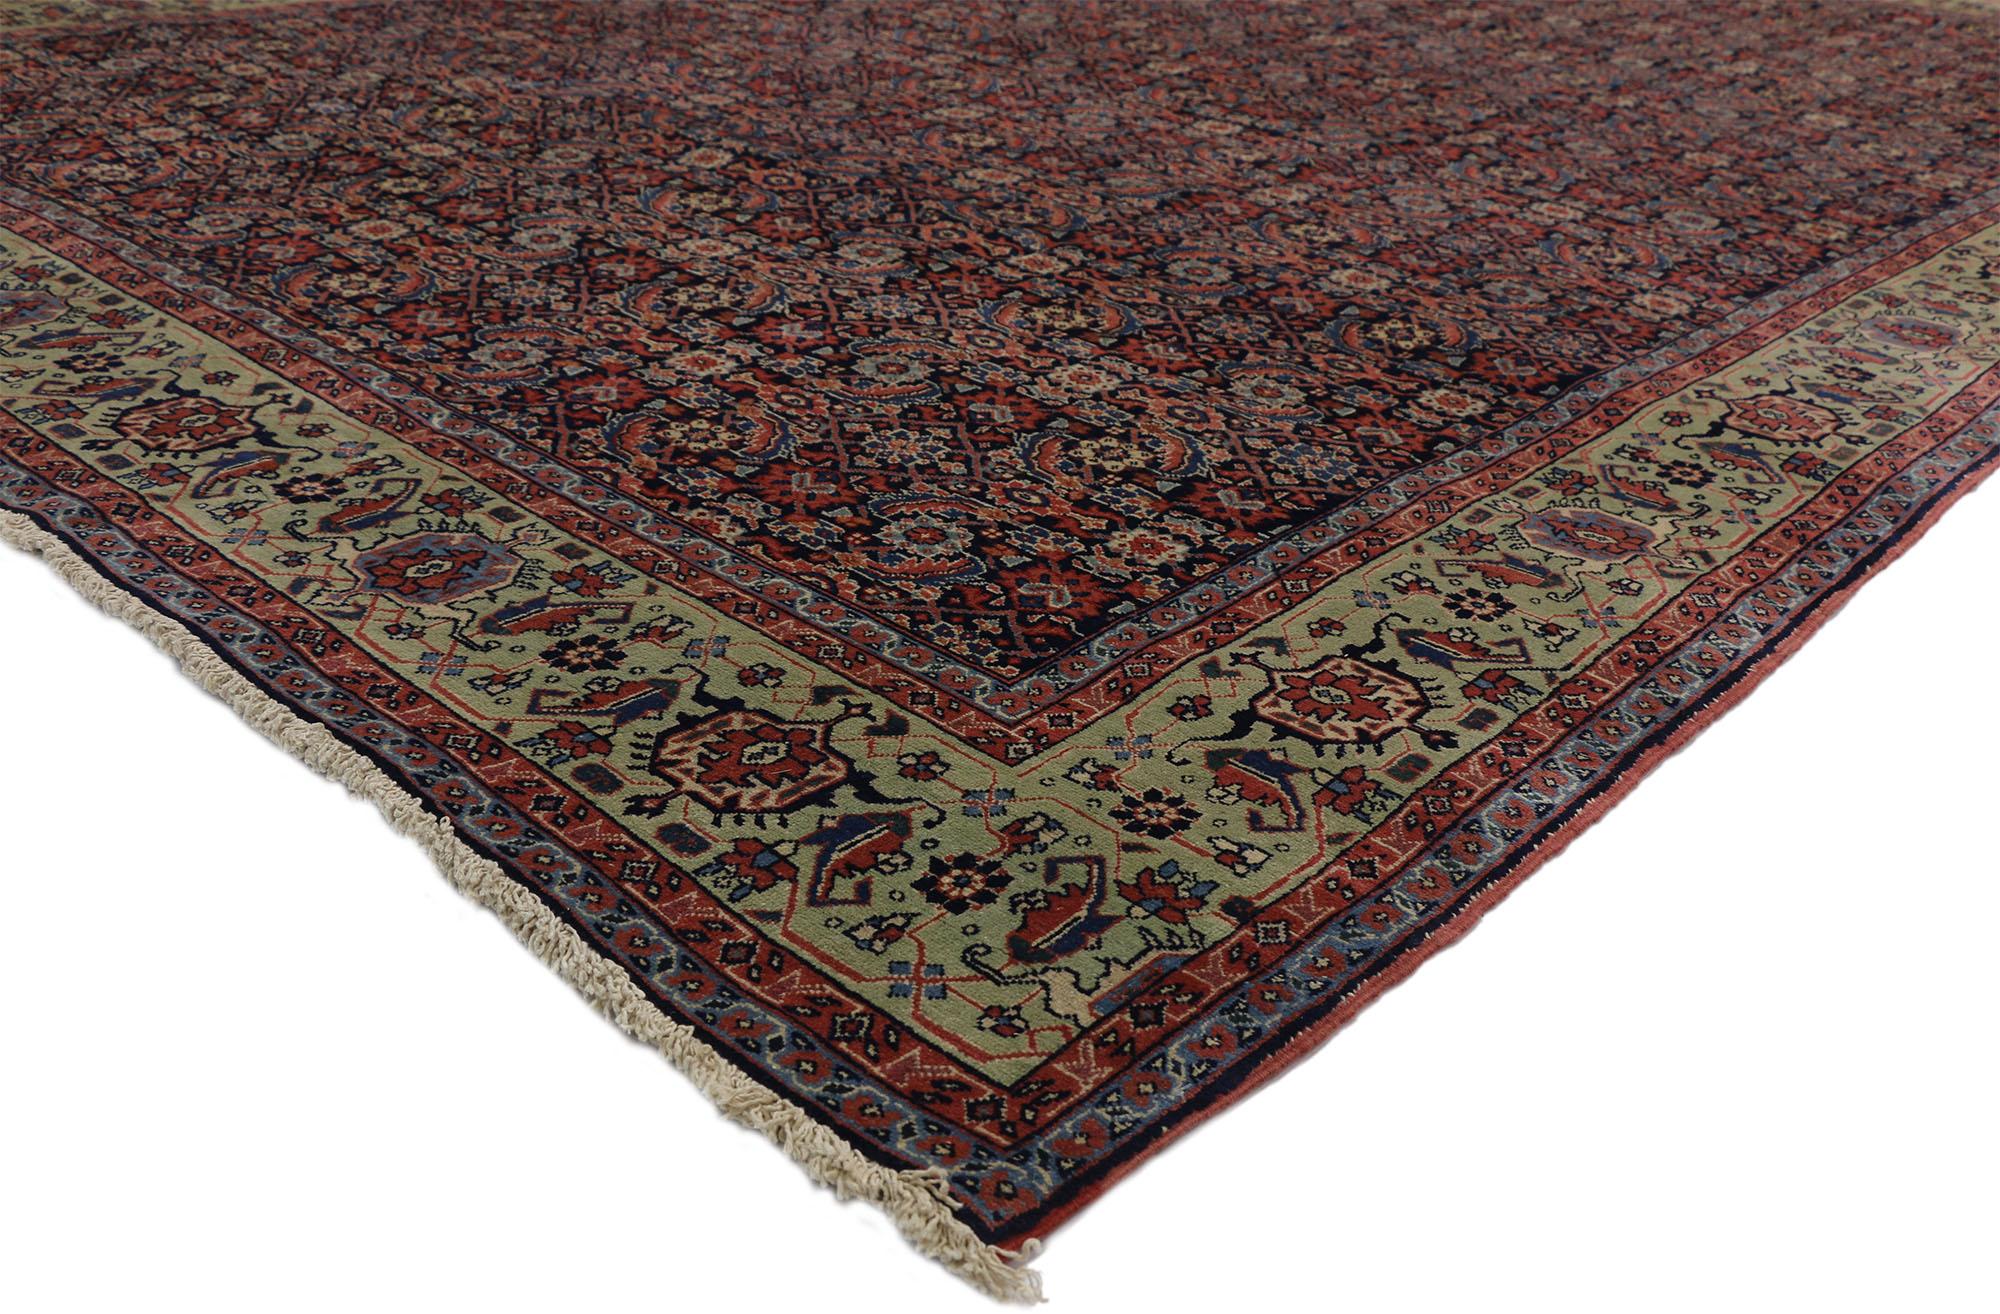 73346 Antique Persian Tabriz Rug with Classic Herati Design. This opulent hand-knotted wool antique Persian Tabriz rug features an all-over Herati pattern spread across an abrashed dark navy blue field. The classic Herati pattern, also known as the